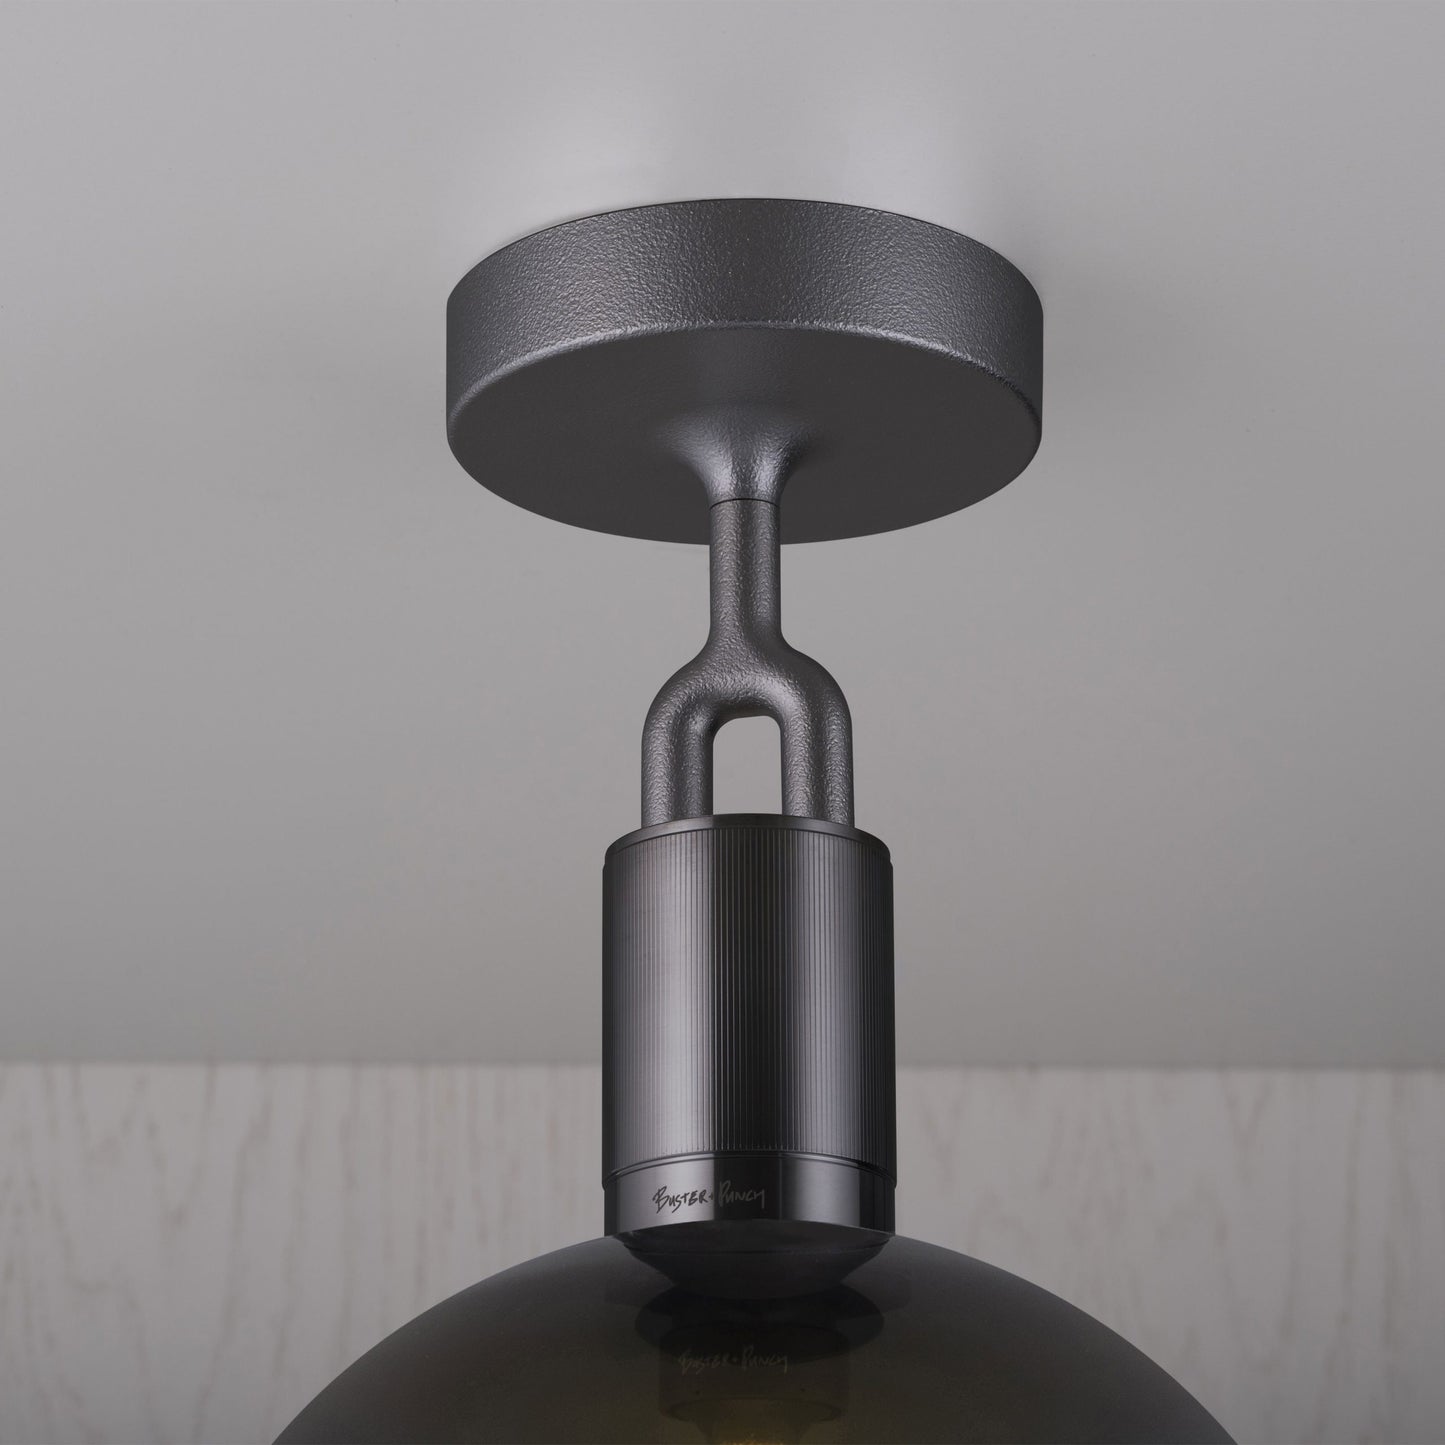 Forked Ceiling Light / Globe / Smoked / Large Gun metal, detailed close up view of fork and fitting.